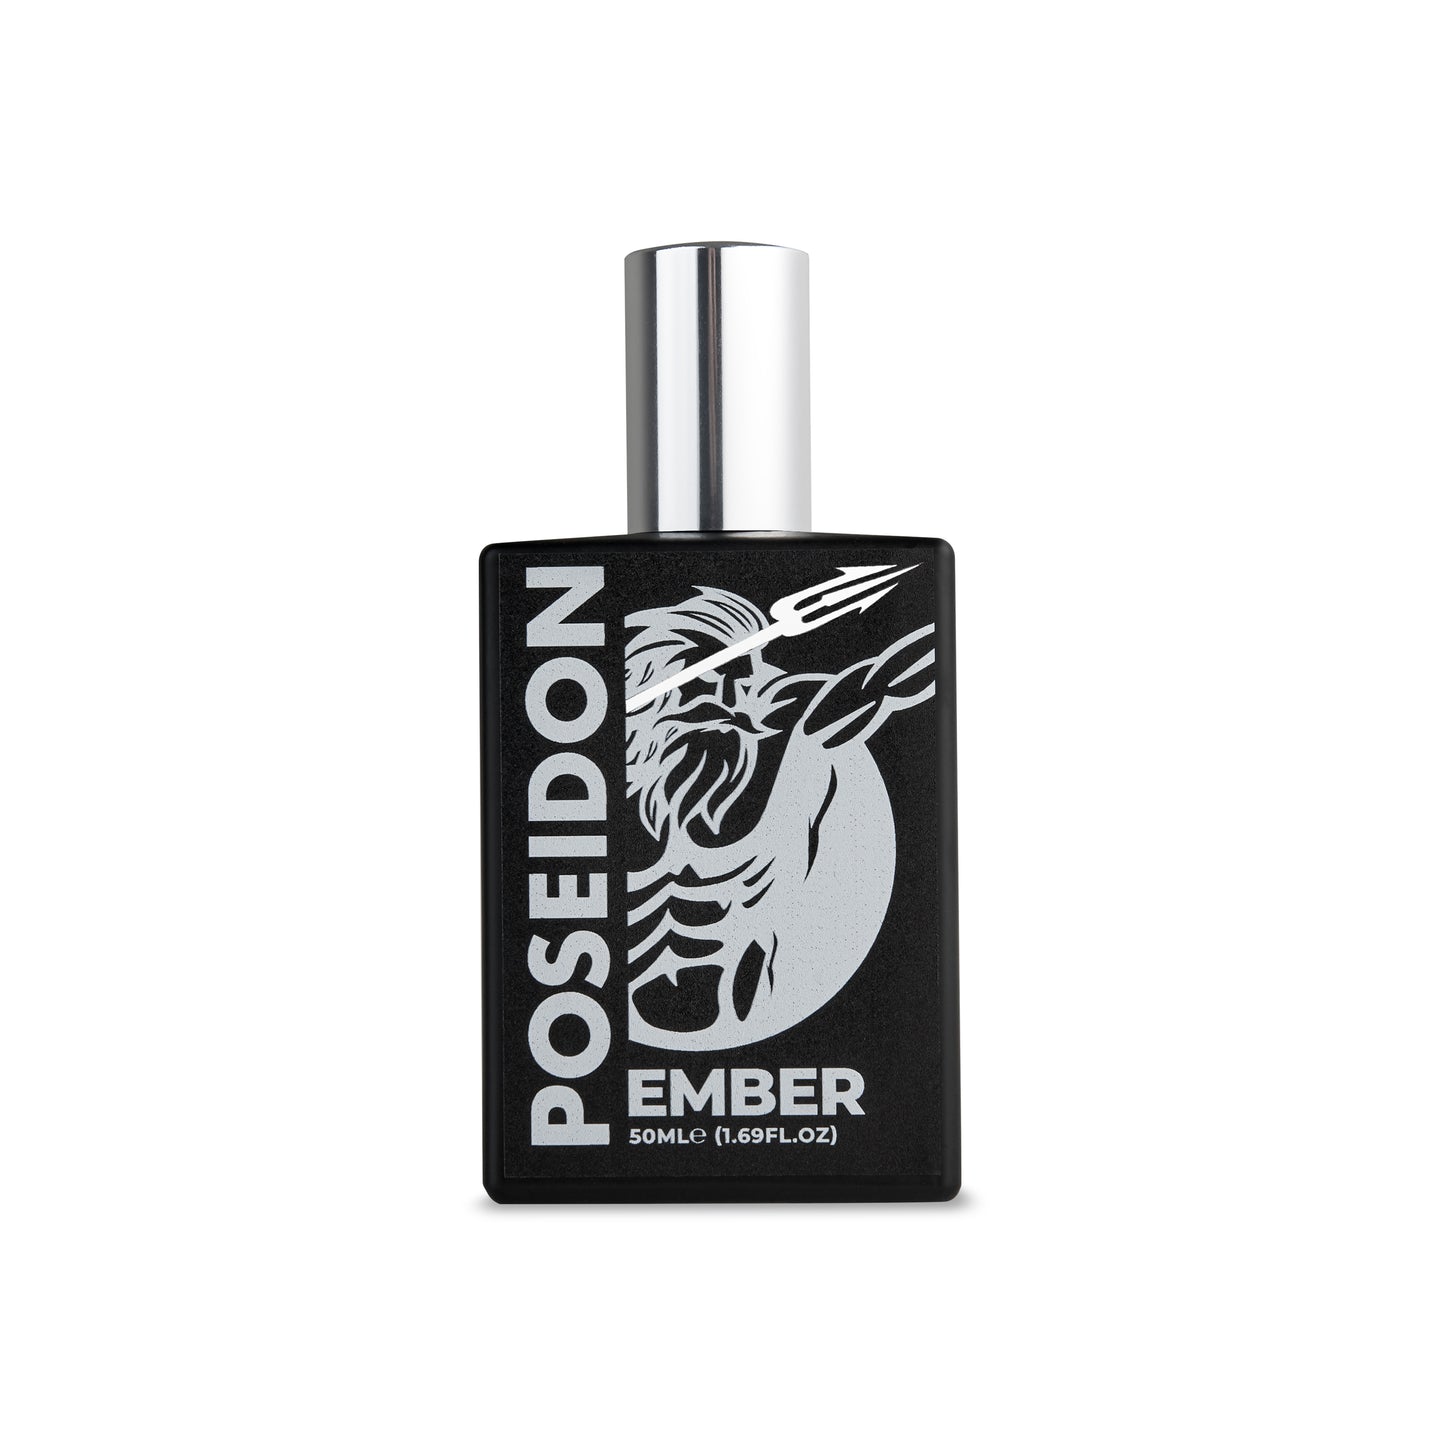 Poseidon Ember Cologne - Woody masculine scent inspired by Louis Vuitton Ombre Nomade. Rich, long-lasting fragrance for the modern gentleman.